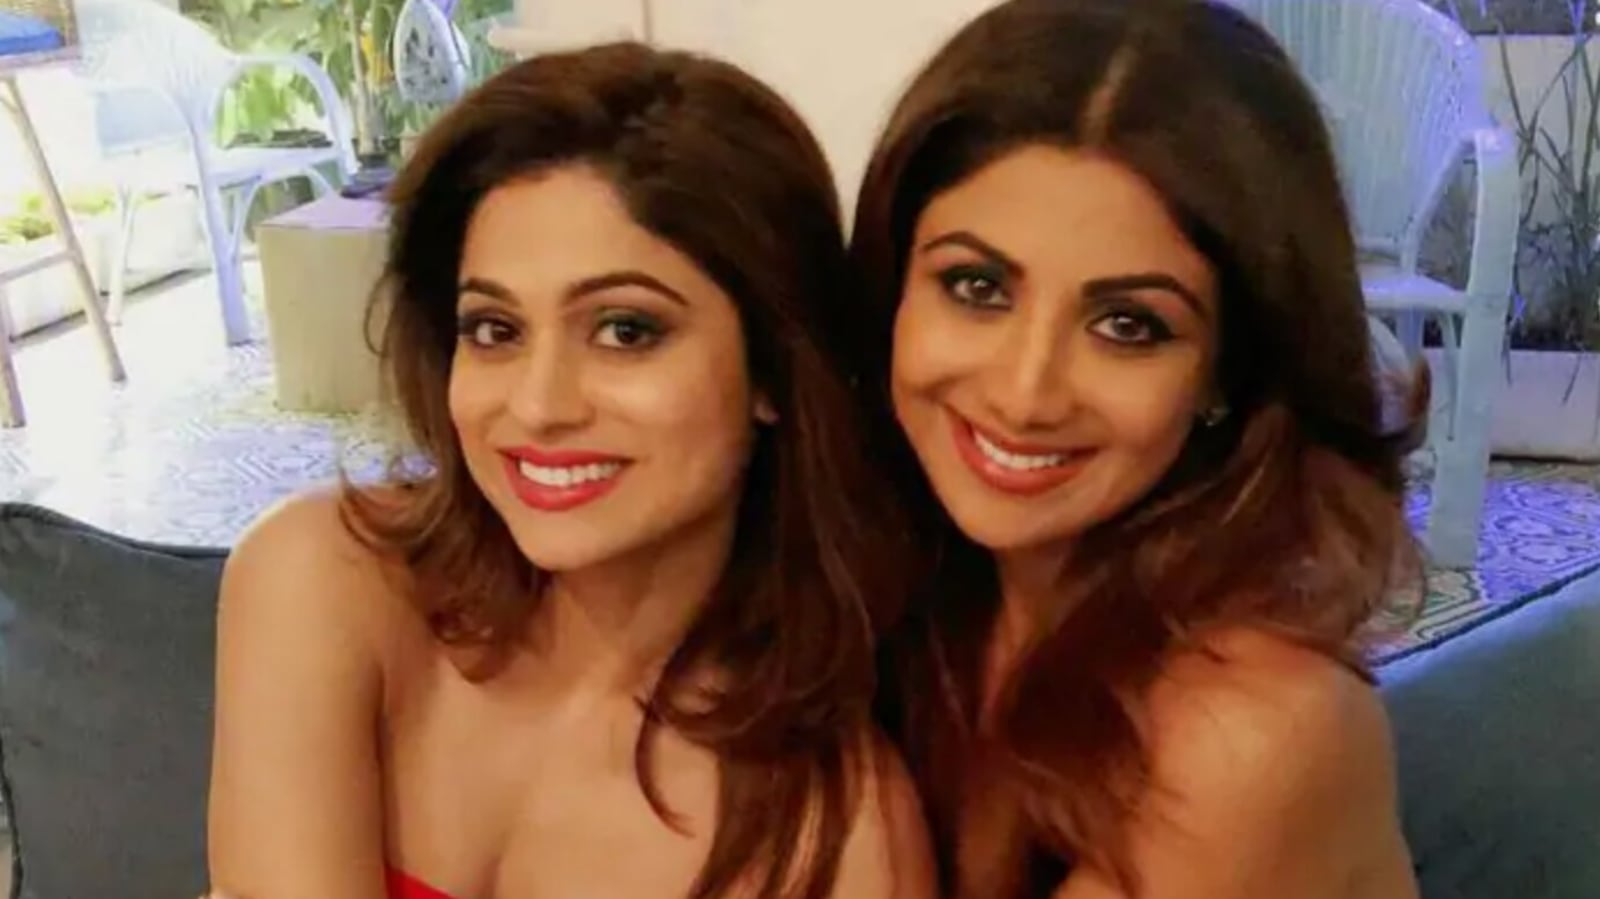 Silpaseti Sex - Hungama 2: Shilpa Shetty's sister Shamita Shetty asks fans to watch film,  assures her of better days | Bollywood - Hindustan Times